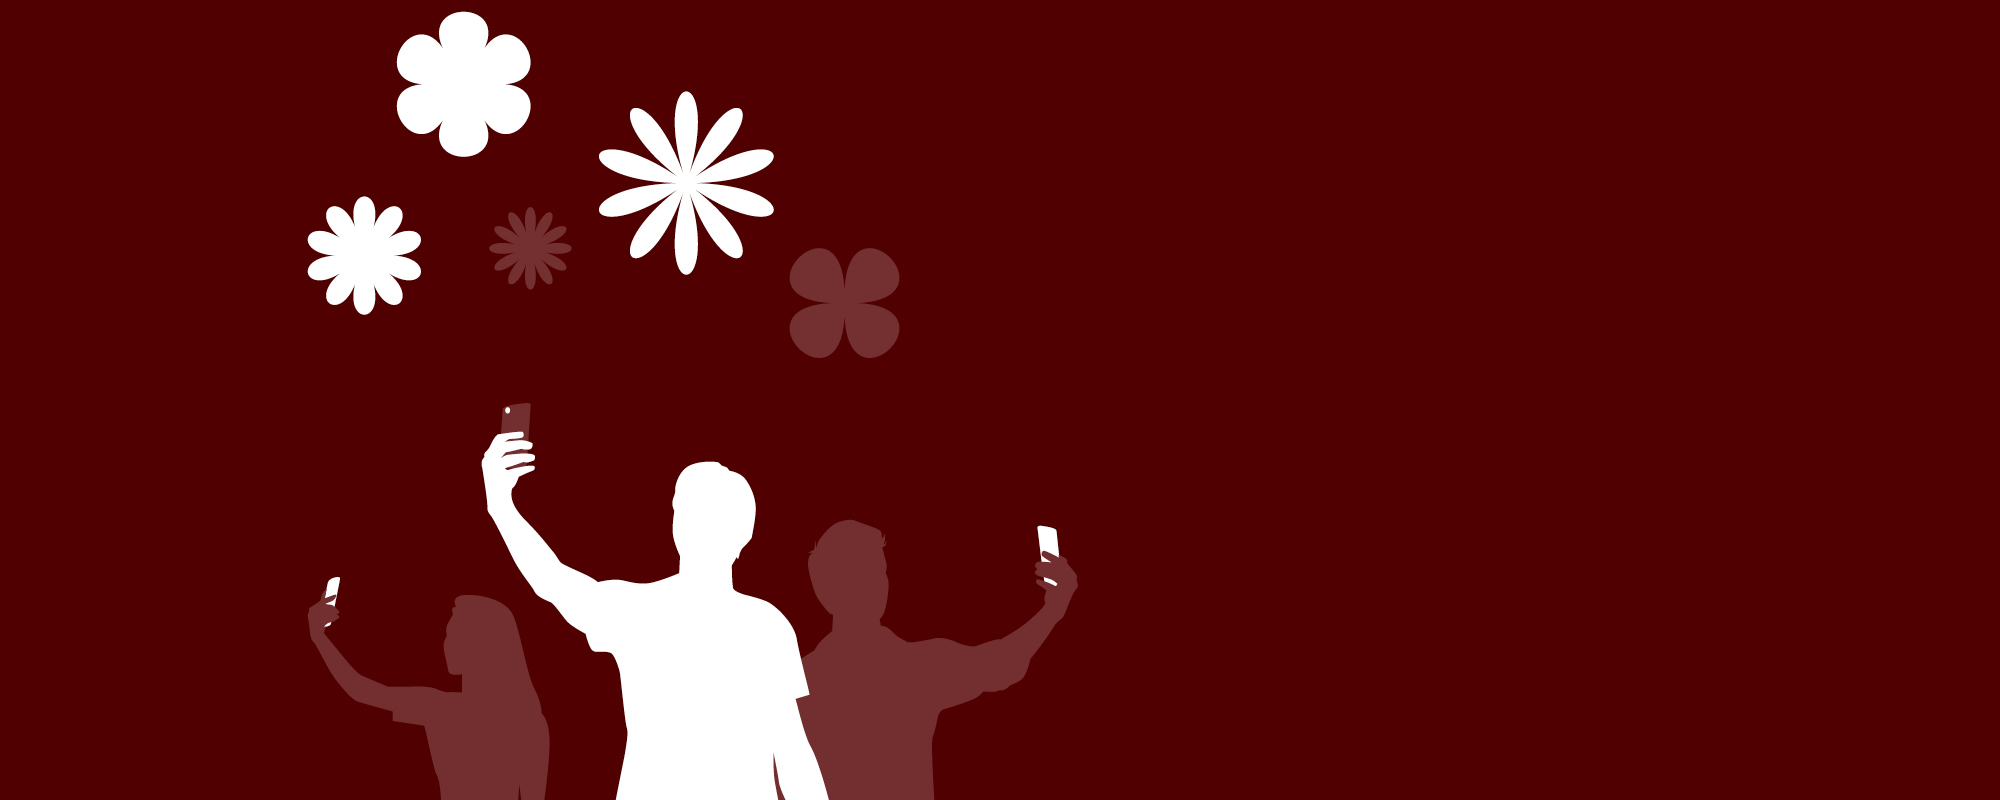 Silhouette of people holding their phones up with flower silhouettes above them.